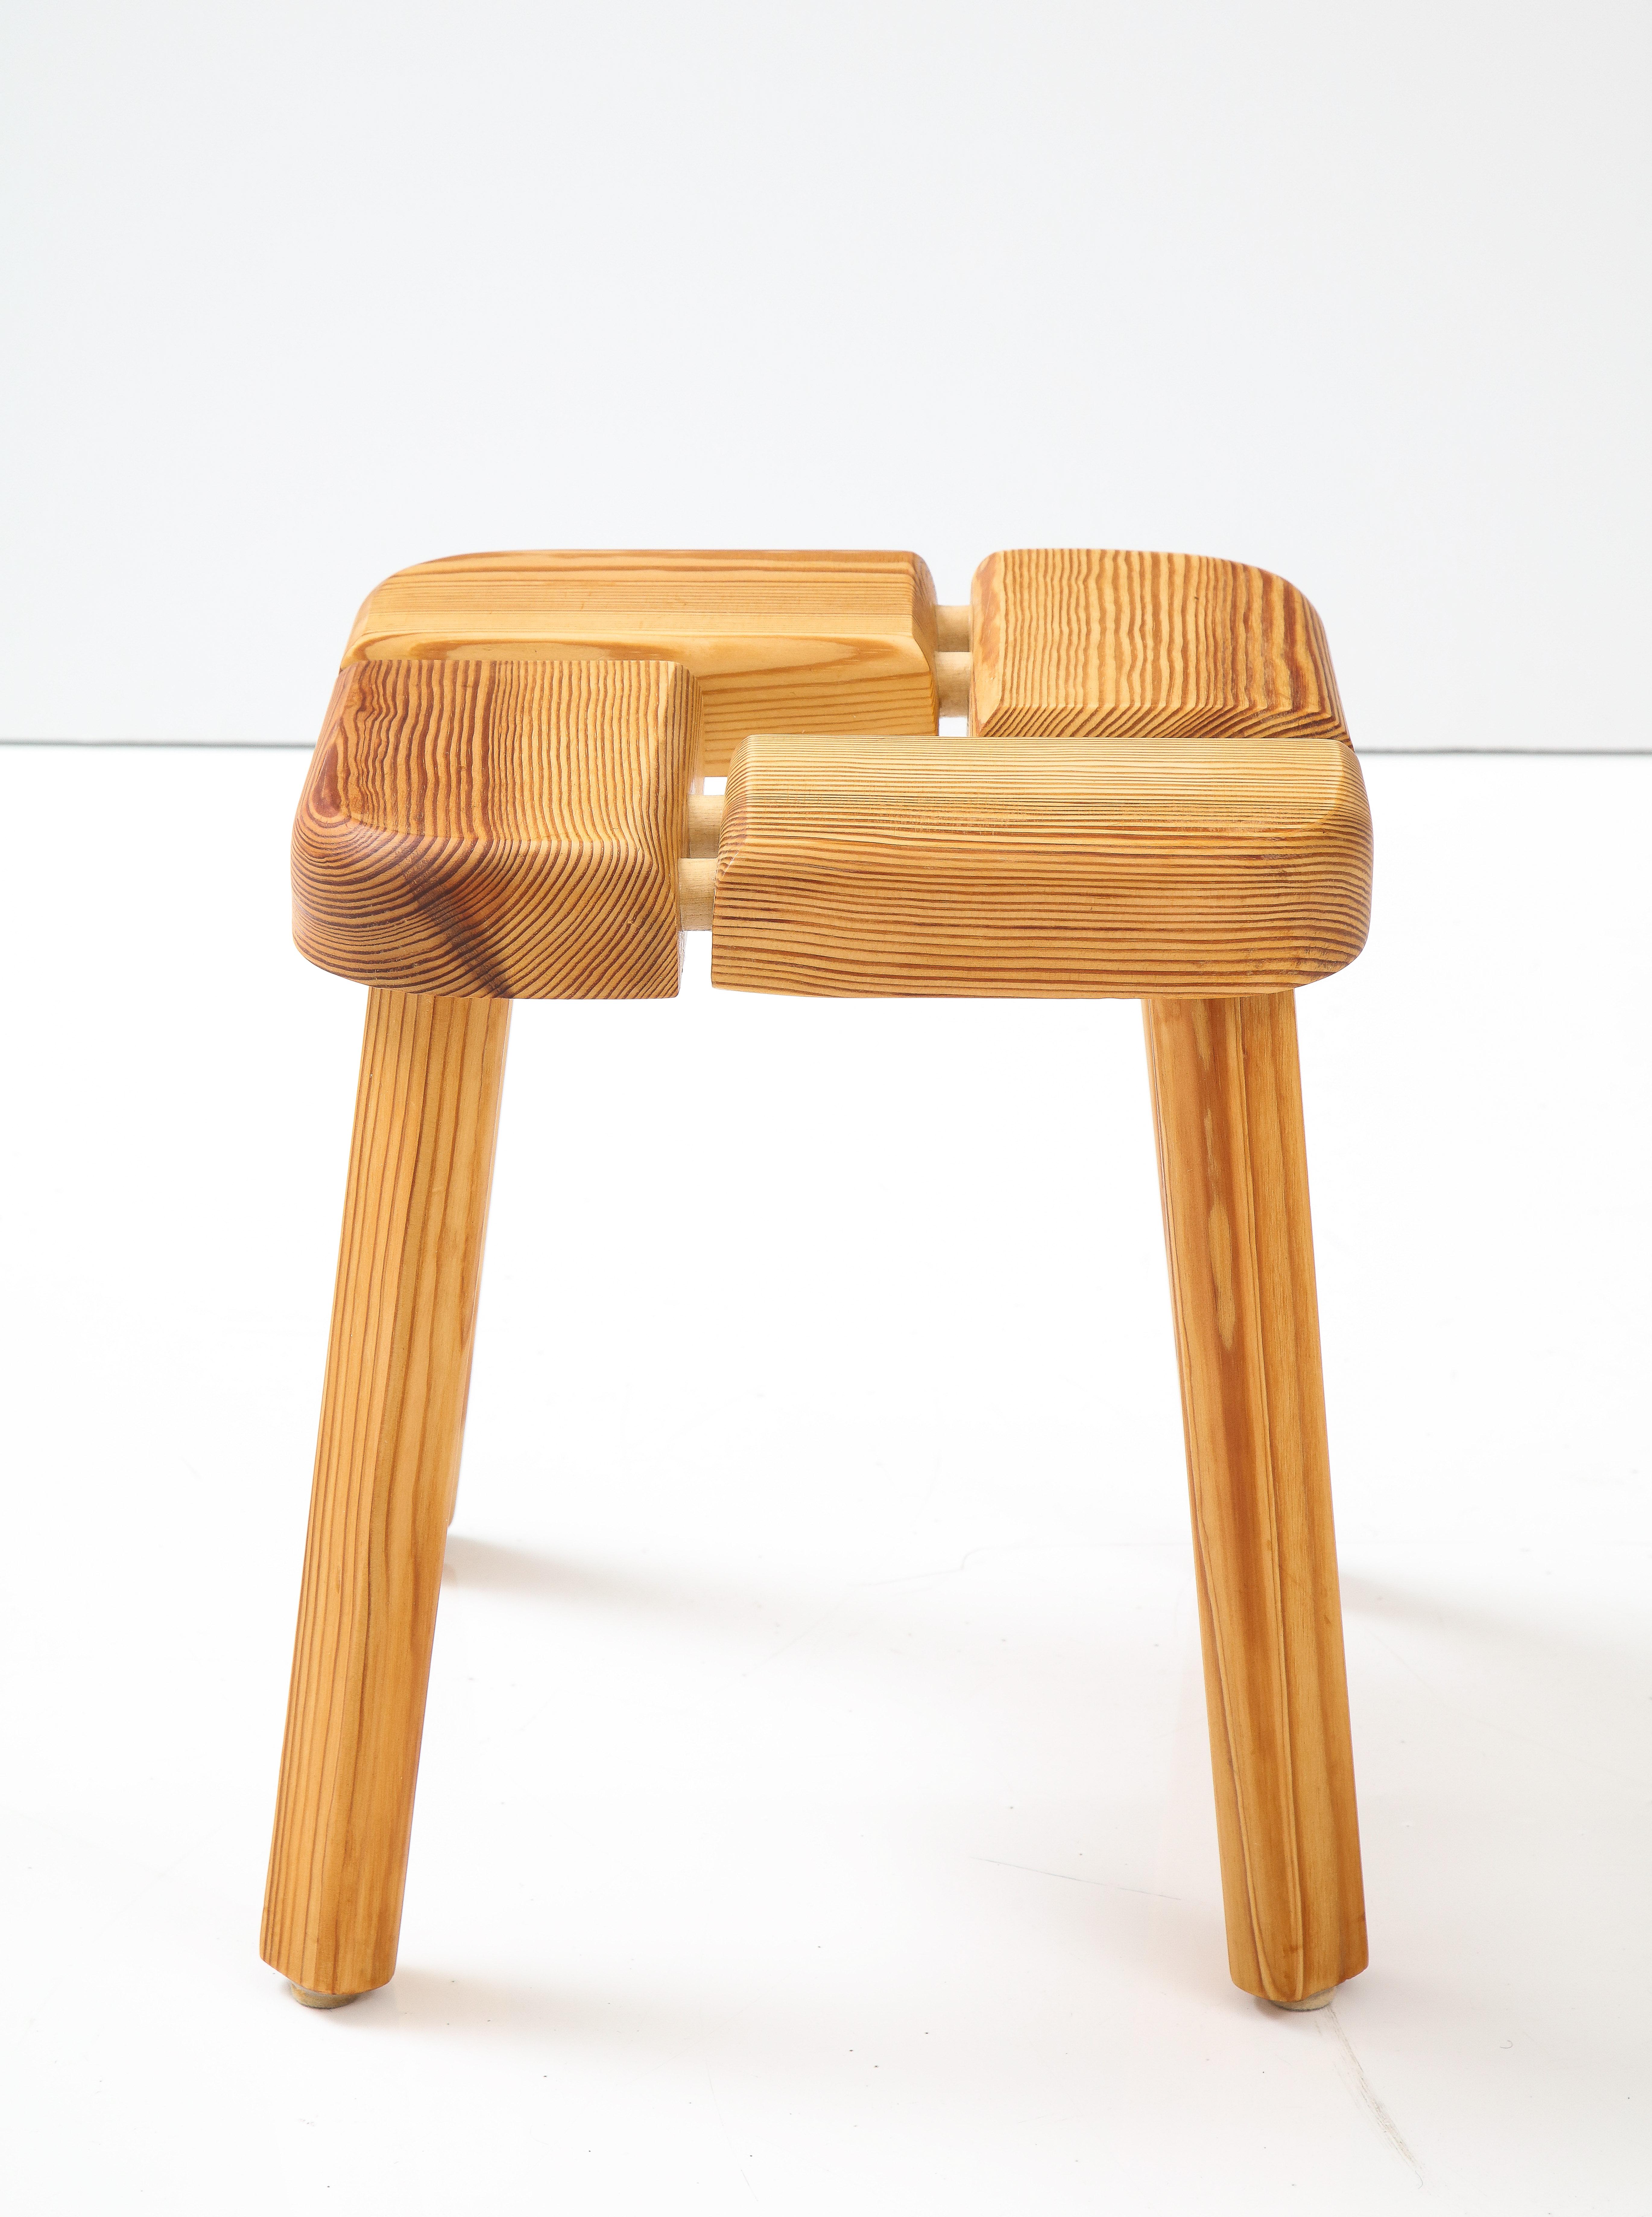 A Finnish pine Modernist stool, Circa 1970s, by Olof Ottelin, the top with four rectangular blocks joined by extended dowels raised on straight legs.